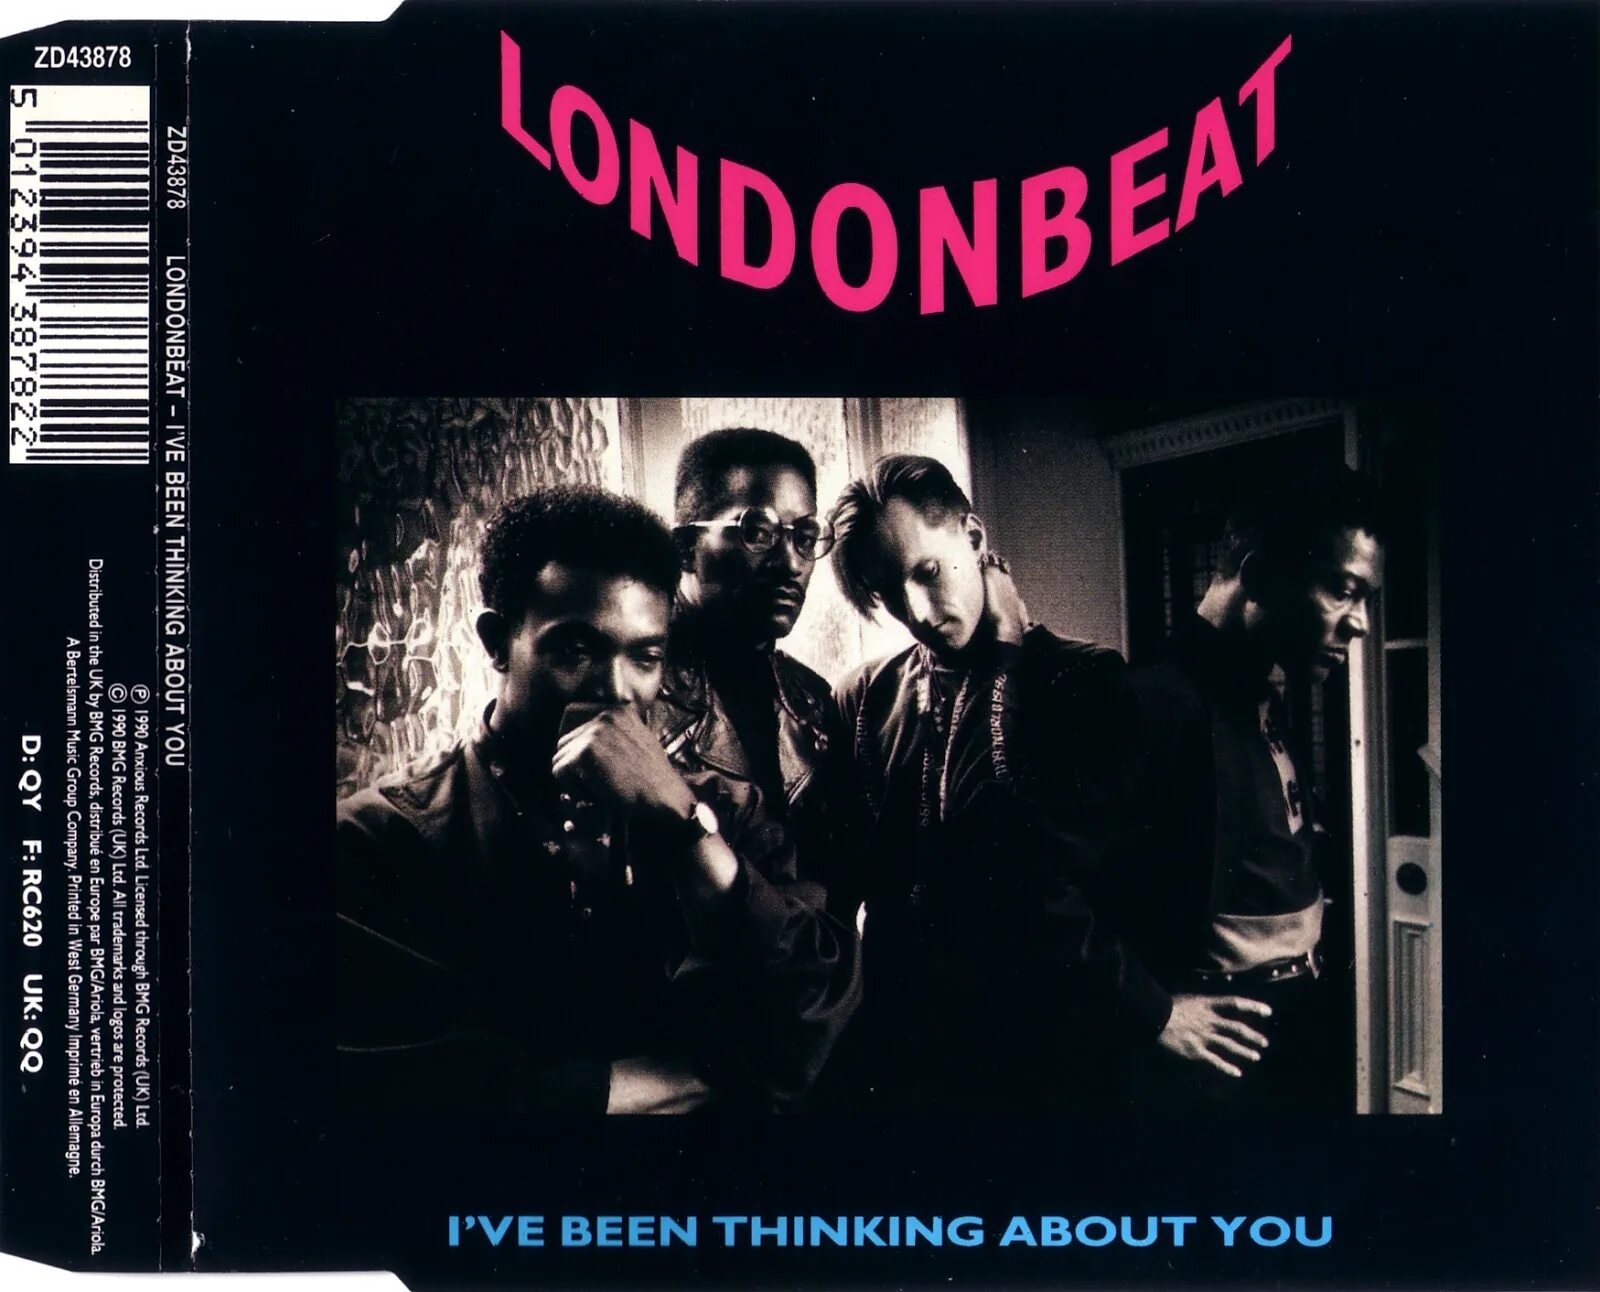 Londonbeat обложка 1990. Londonbeat i've been thinking about you. Londonbeat фото. Londonbeat - in the Blood. I ve been offered